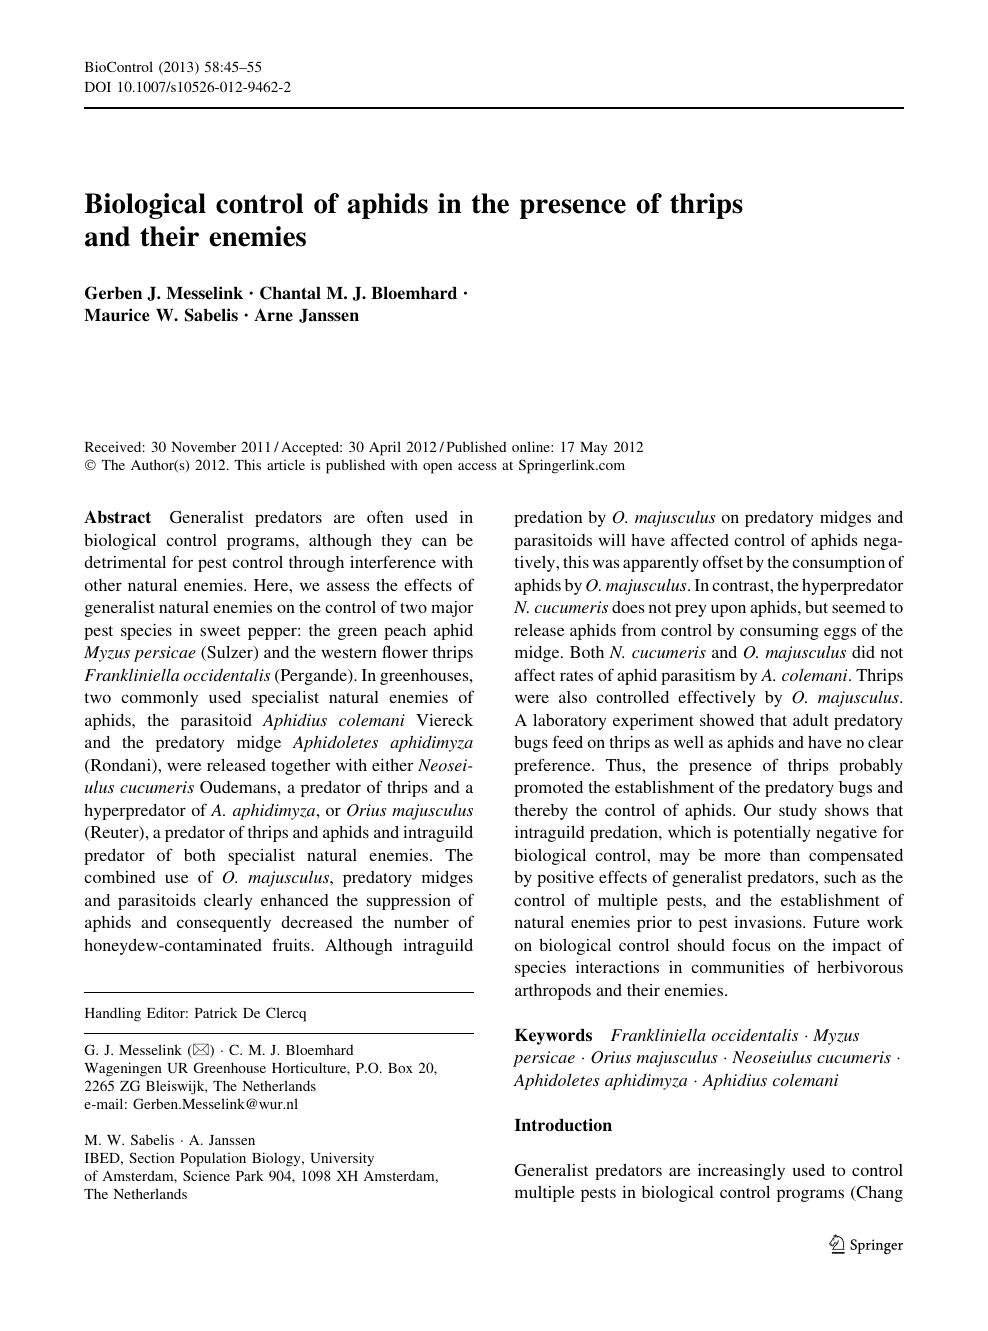 Biological control of aphids in the presence of thrips and their